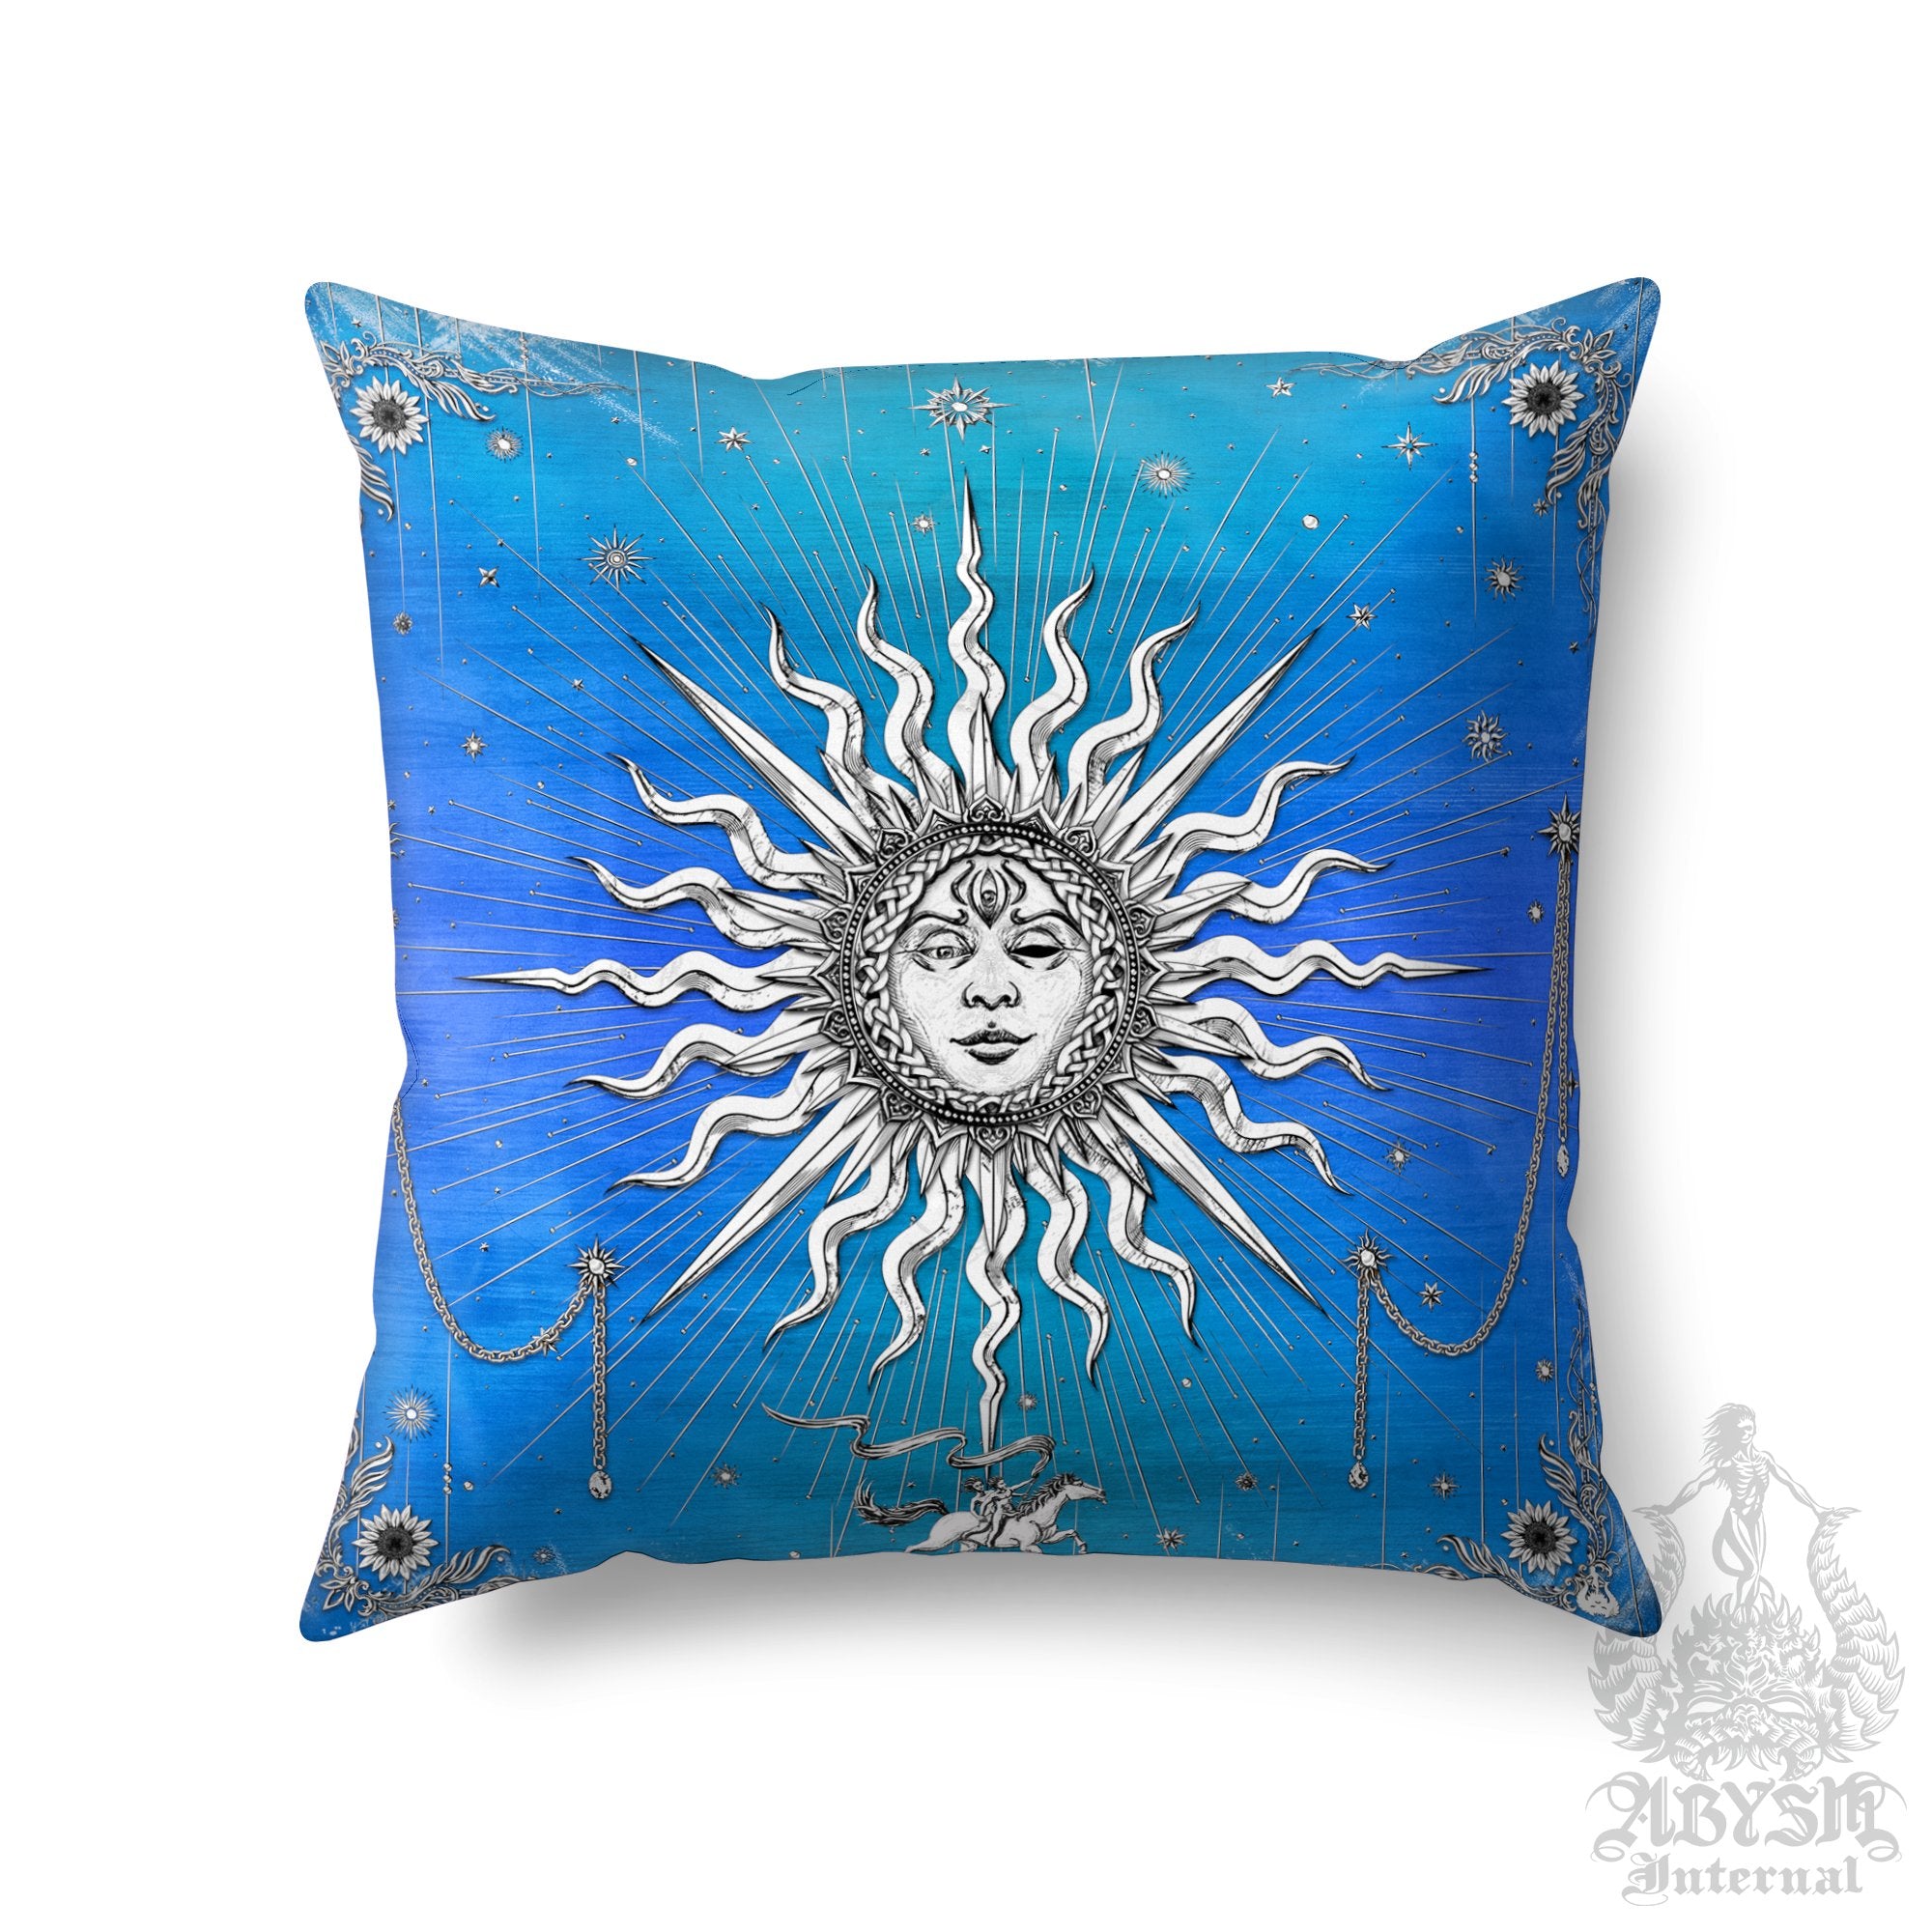 White Sun Throw Pillow, Boho Decorative Accent Pillow, Square Cushion Cover, Arcana Tarot Art, Indie Home, Fortune & Magic Room Decor - Paper, 6 Colors - Abysm Internal